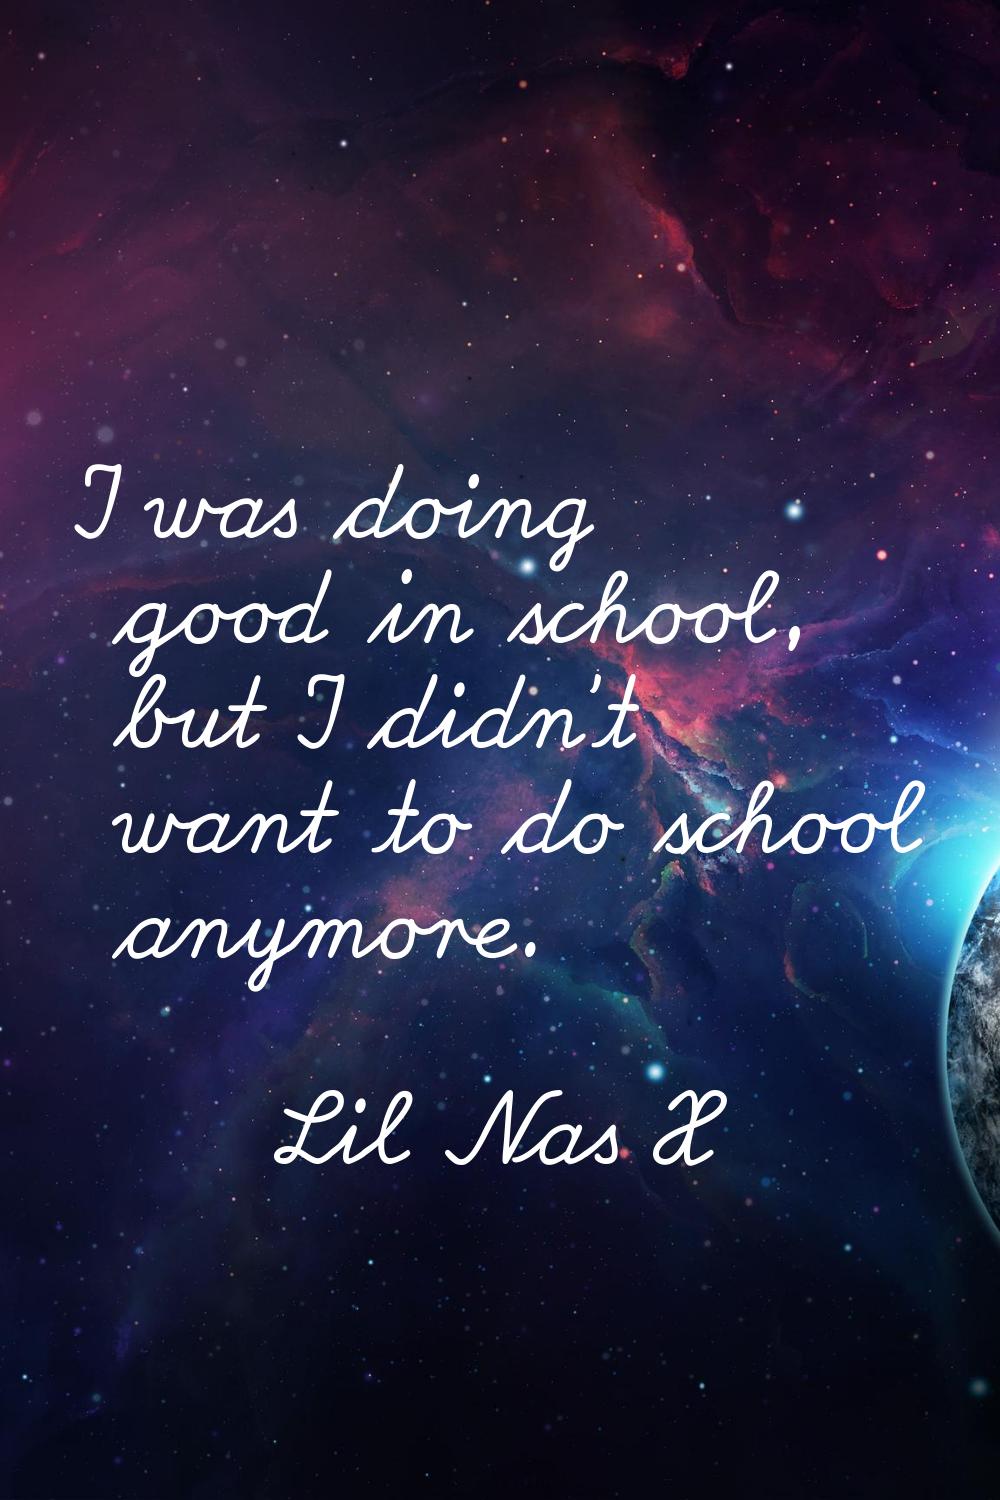 I was doing good in school, but I didn't want to do school anymore.